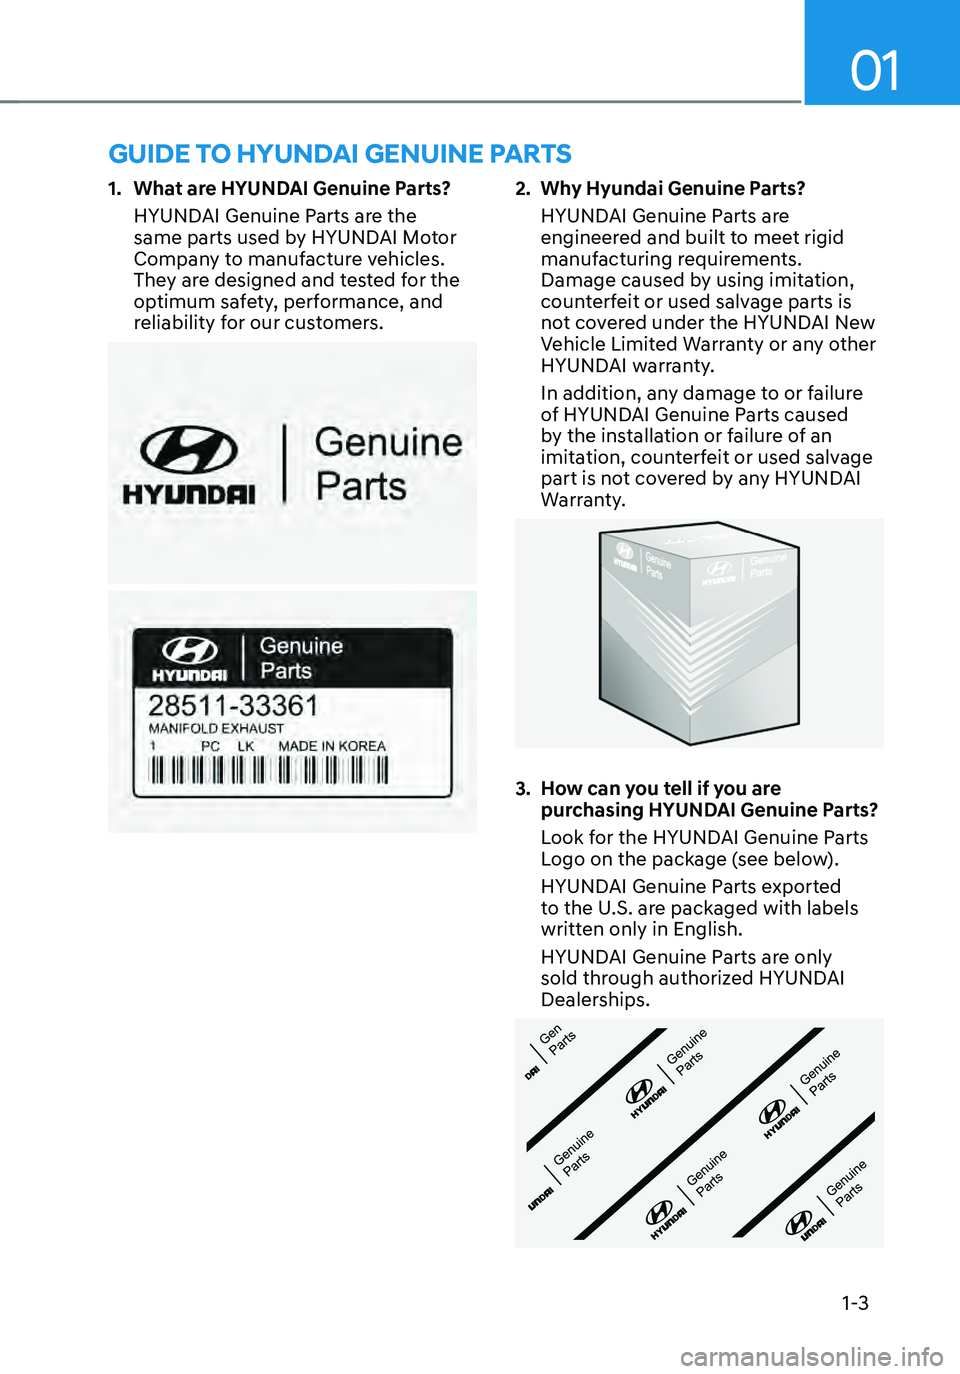 HYUNDAI SANTA FE HYBRID 2021  Owners Manual 01
1-3
GUIDE TO HYUNDAI GENUINE PARTS
1. What are HYUNDAI Genuine Parts?
HYUNDAI Genuine Parts are the 
same parts used by HYUNDAI Motor 
Company to manufacture vehicles. 
They are designed and tested